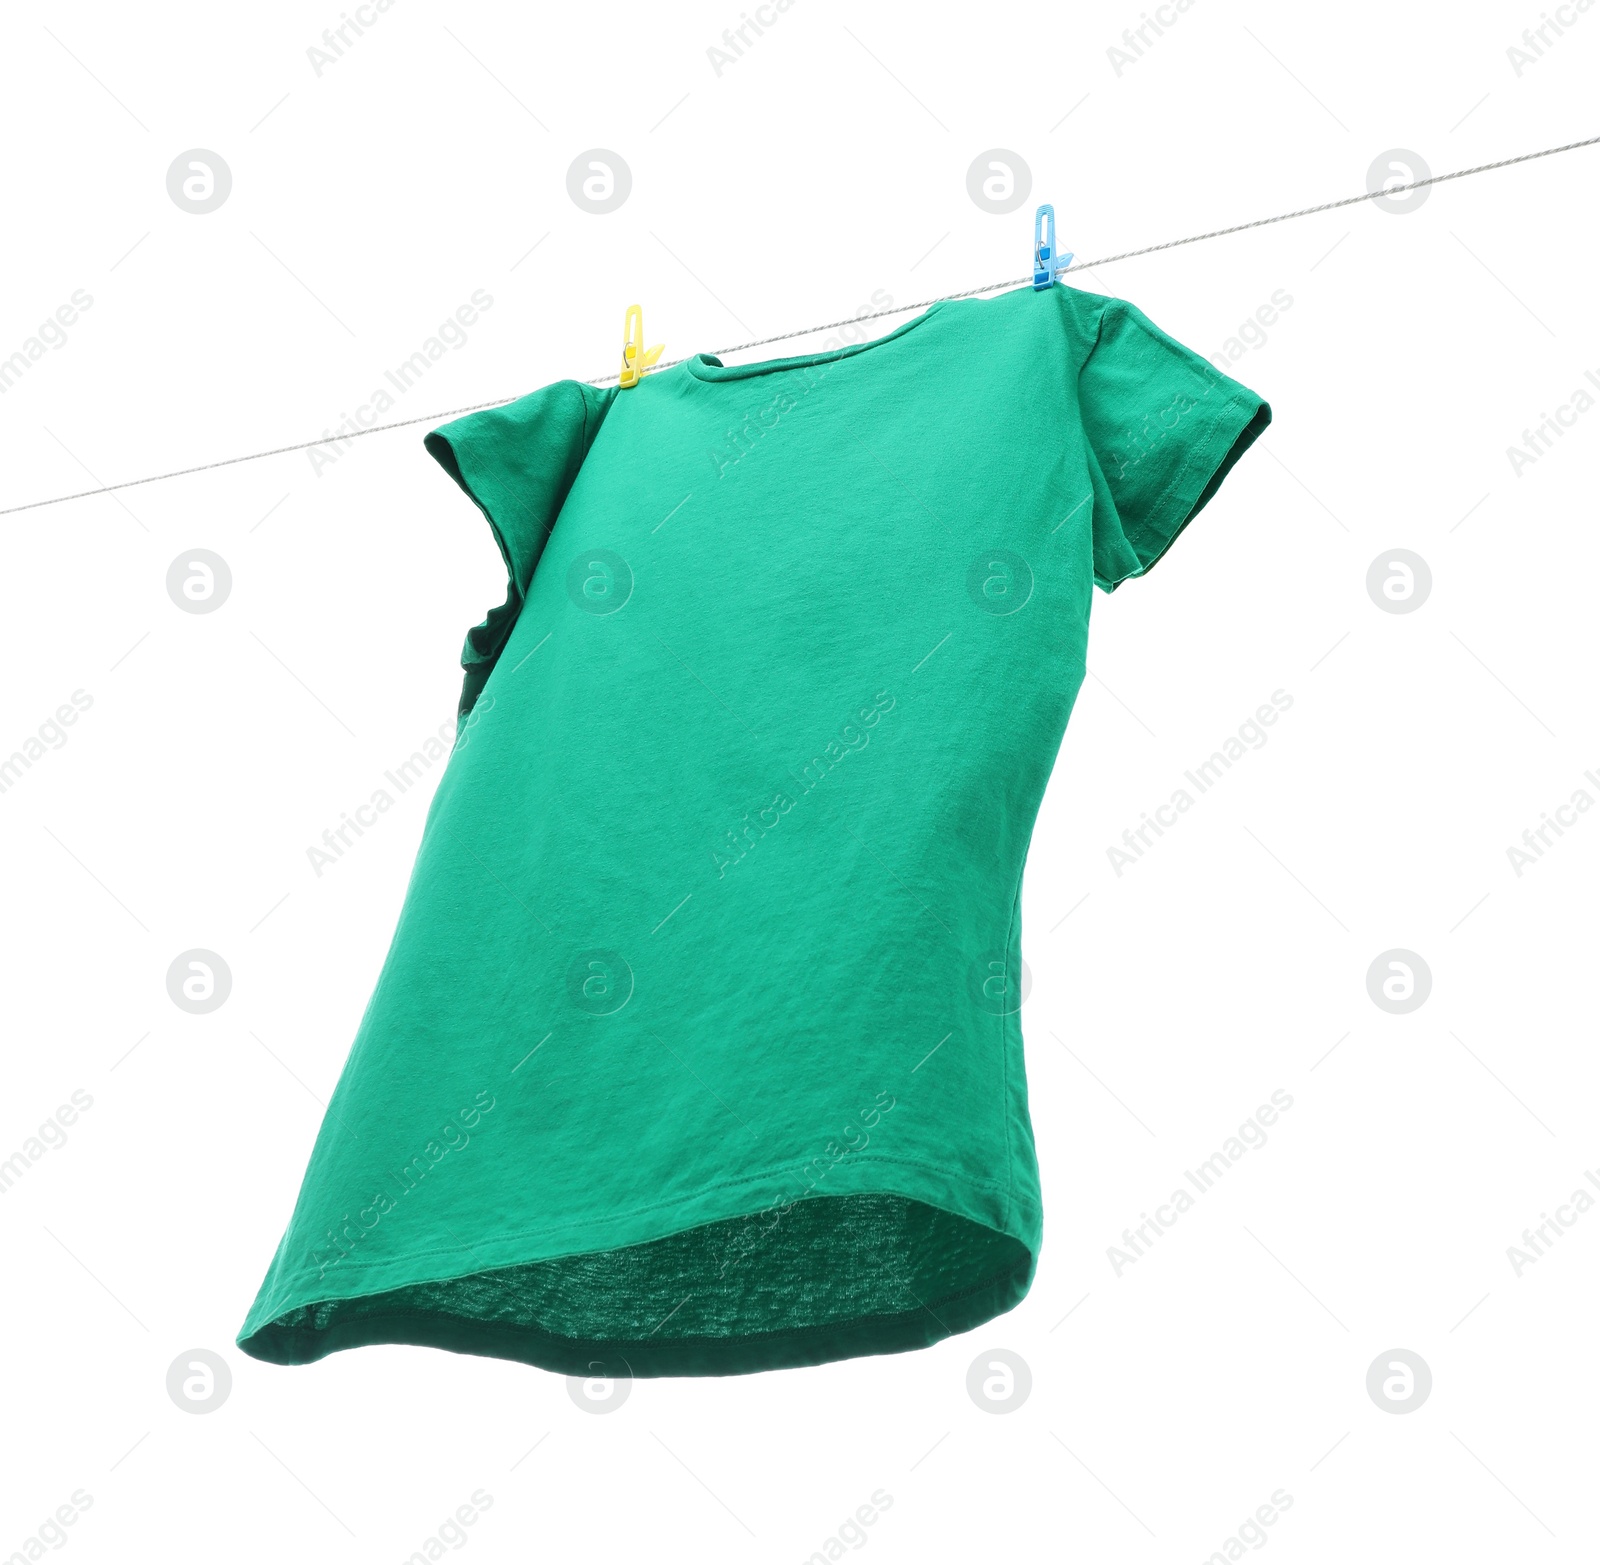 Photo of One green t-shirt drying on washing line isolated on white